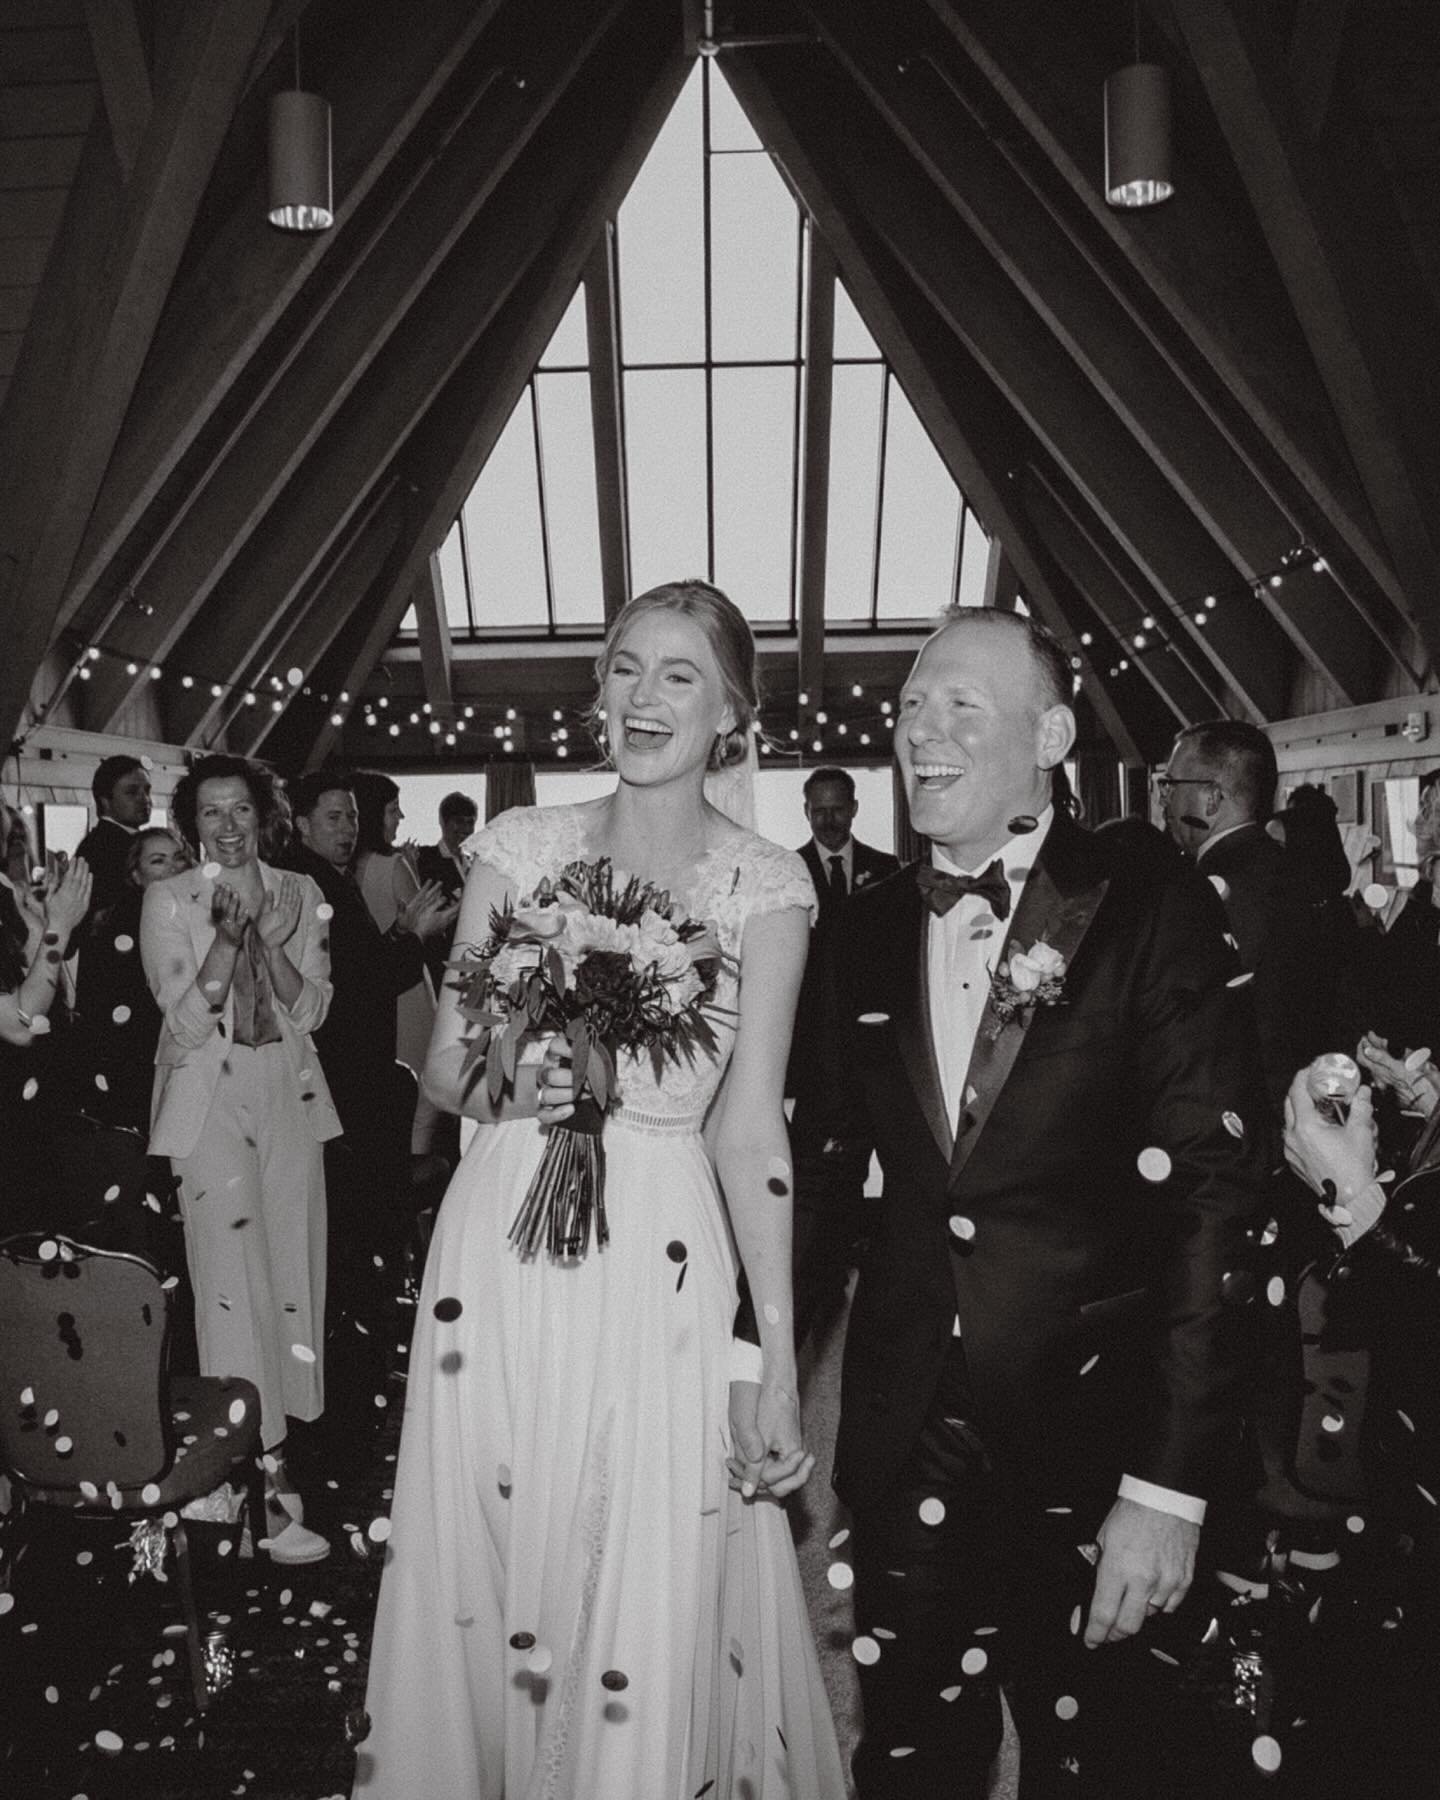 1/3 - The Augustine&rsquo;s celebrated their first anniversary recently and these are just a few of my most favorite images from their day 🥹
.
The Ravens Nest @timberlinelodge 
HMU @artistrybymai 
Photo @lilysandhornsphoto 
.
#timberlinelodge #timbe